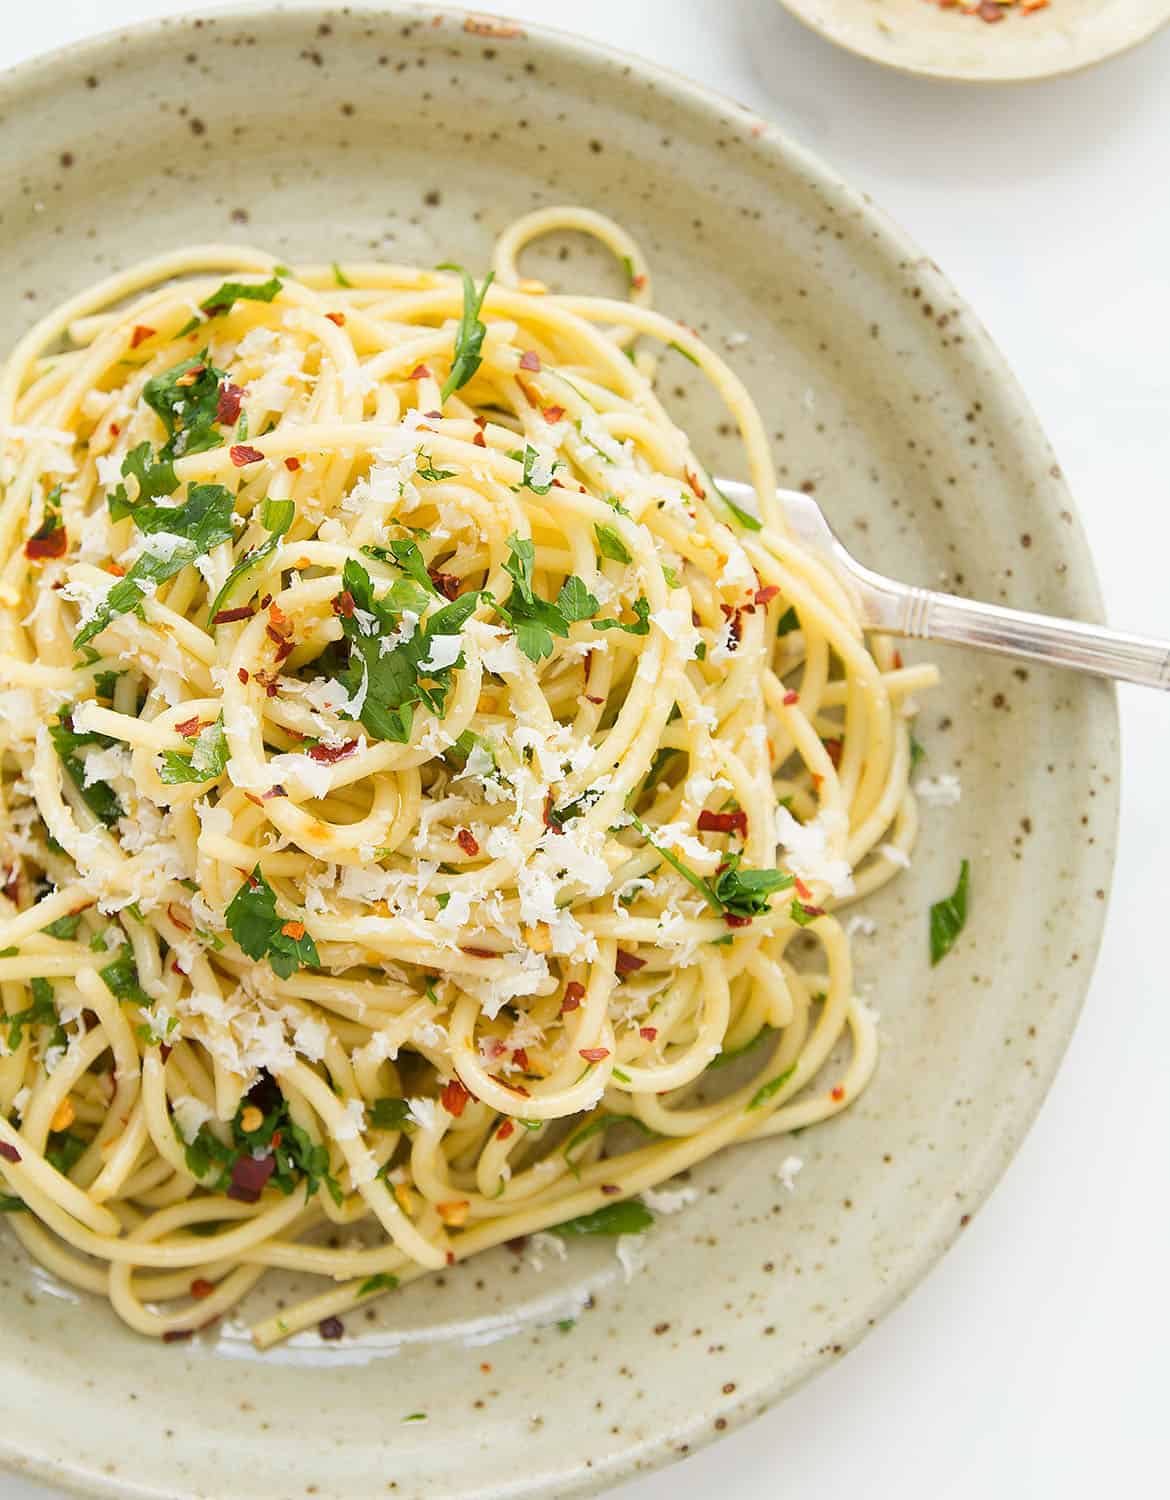 Spaghetti with garlic, olive oil and parsley on a rustic gres plate.